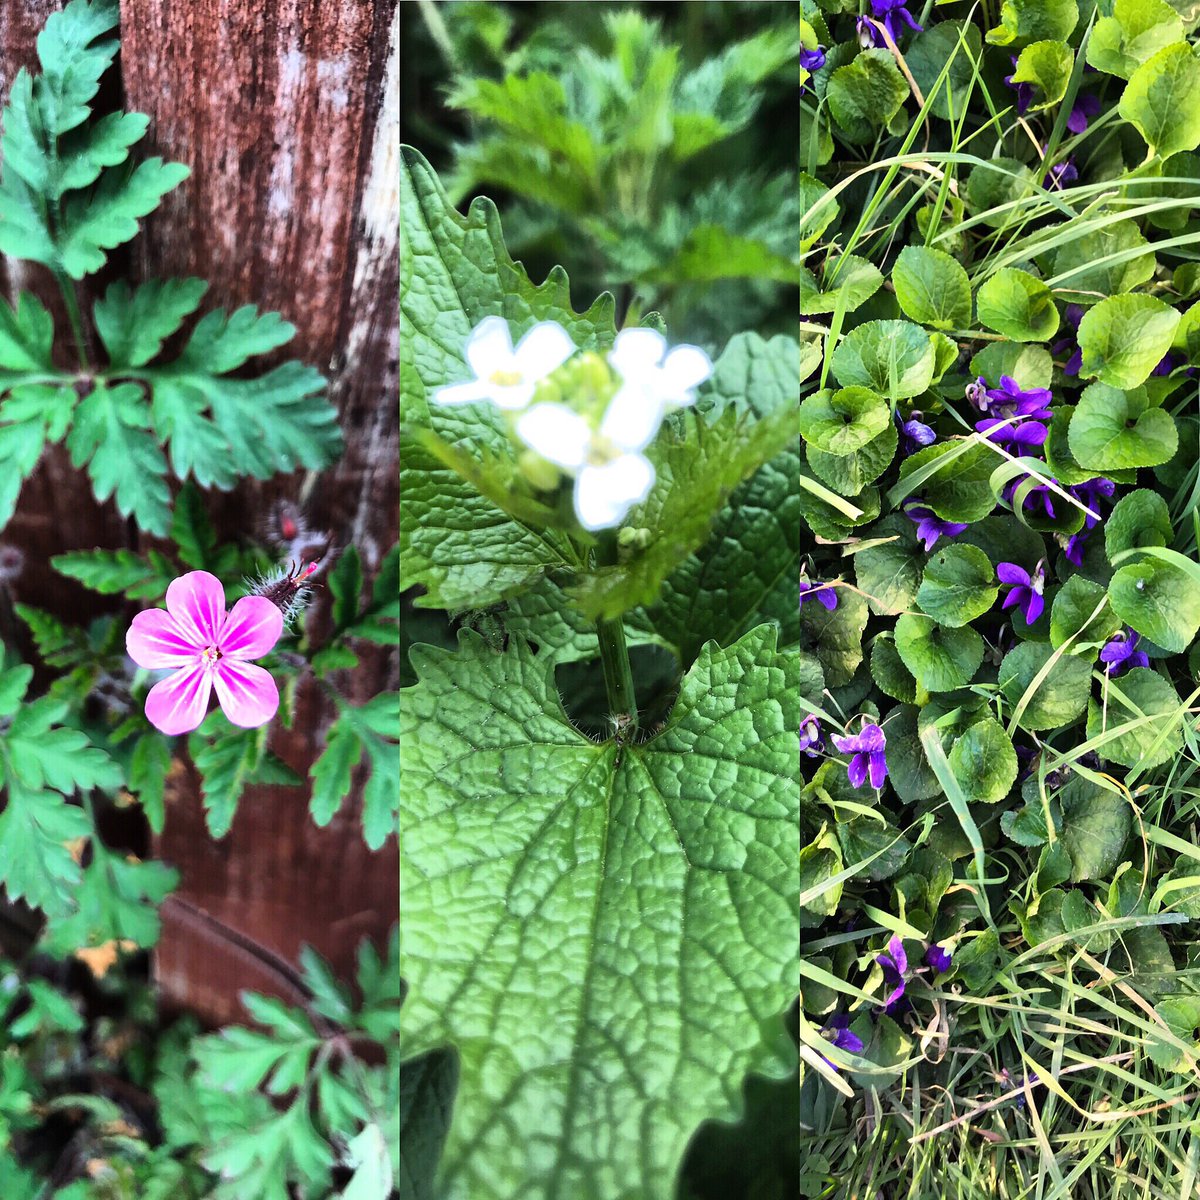 A recap on yesterday’s  #wildflowers Herb Robert, Garlic Mustard and Violet. Theo found some more today! Coming up.  #twopointsixchallenge  #bowelcancer  #fundraising